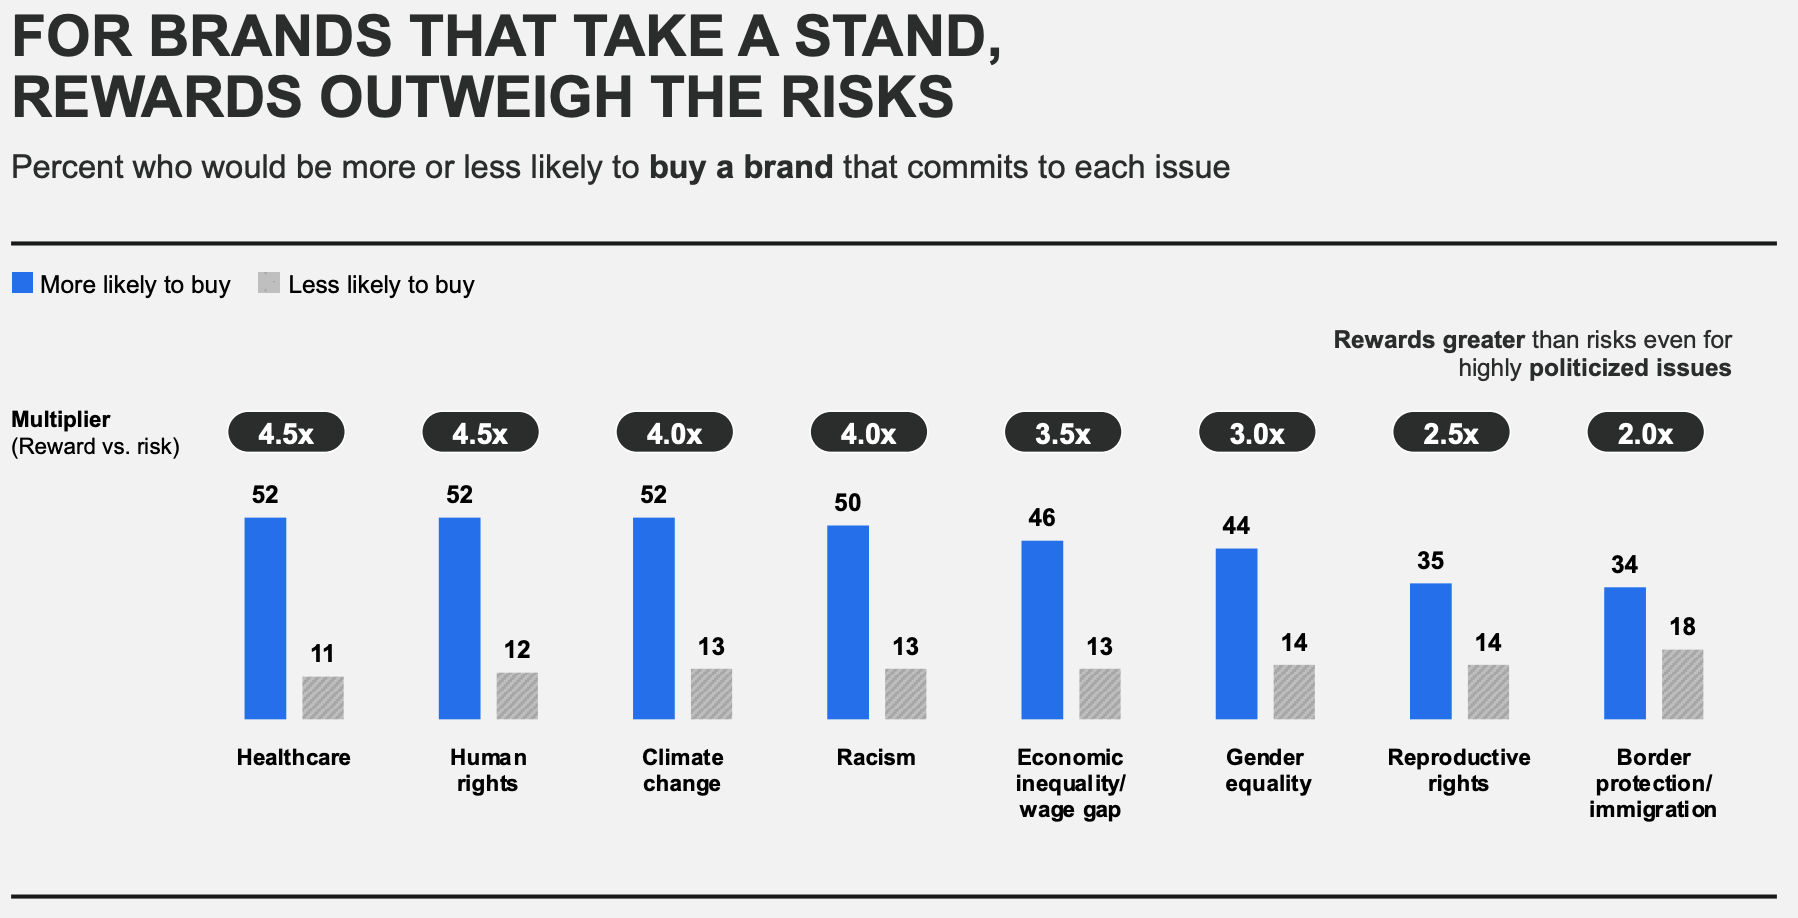 Percent who would be more or less likely to buy a brand that commits to each issue